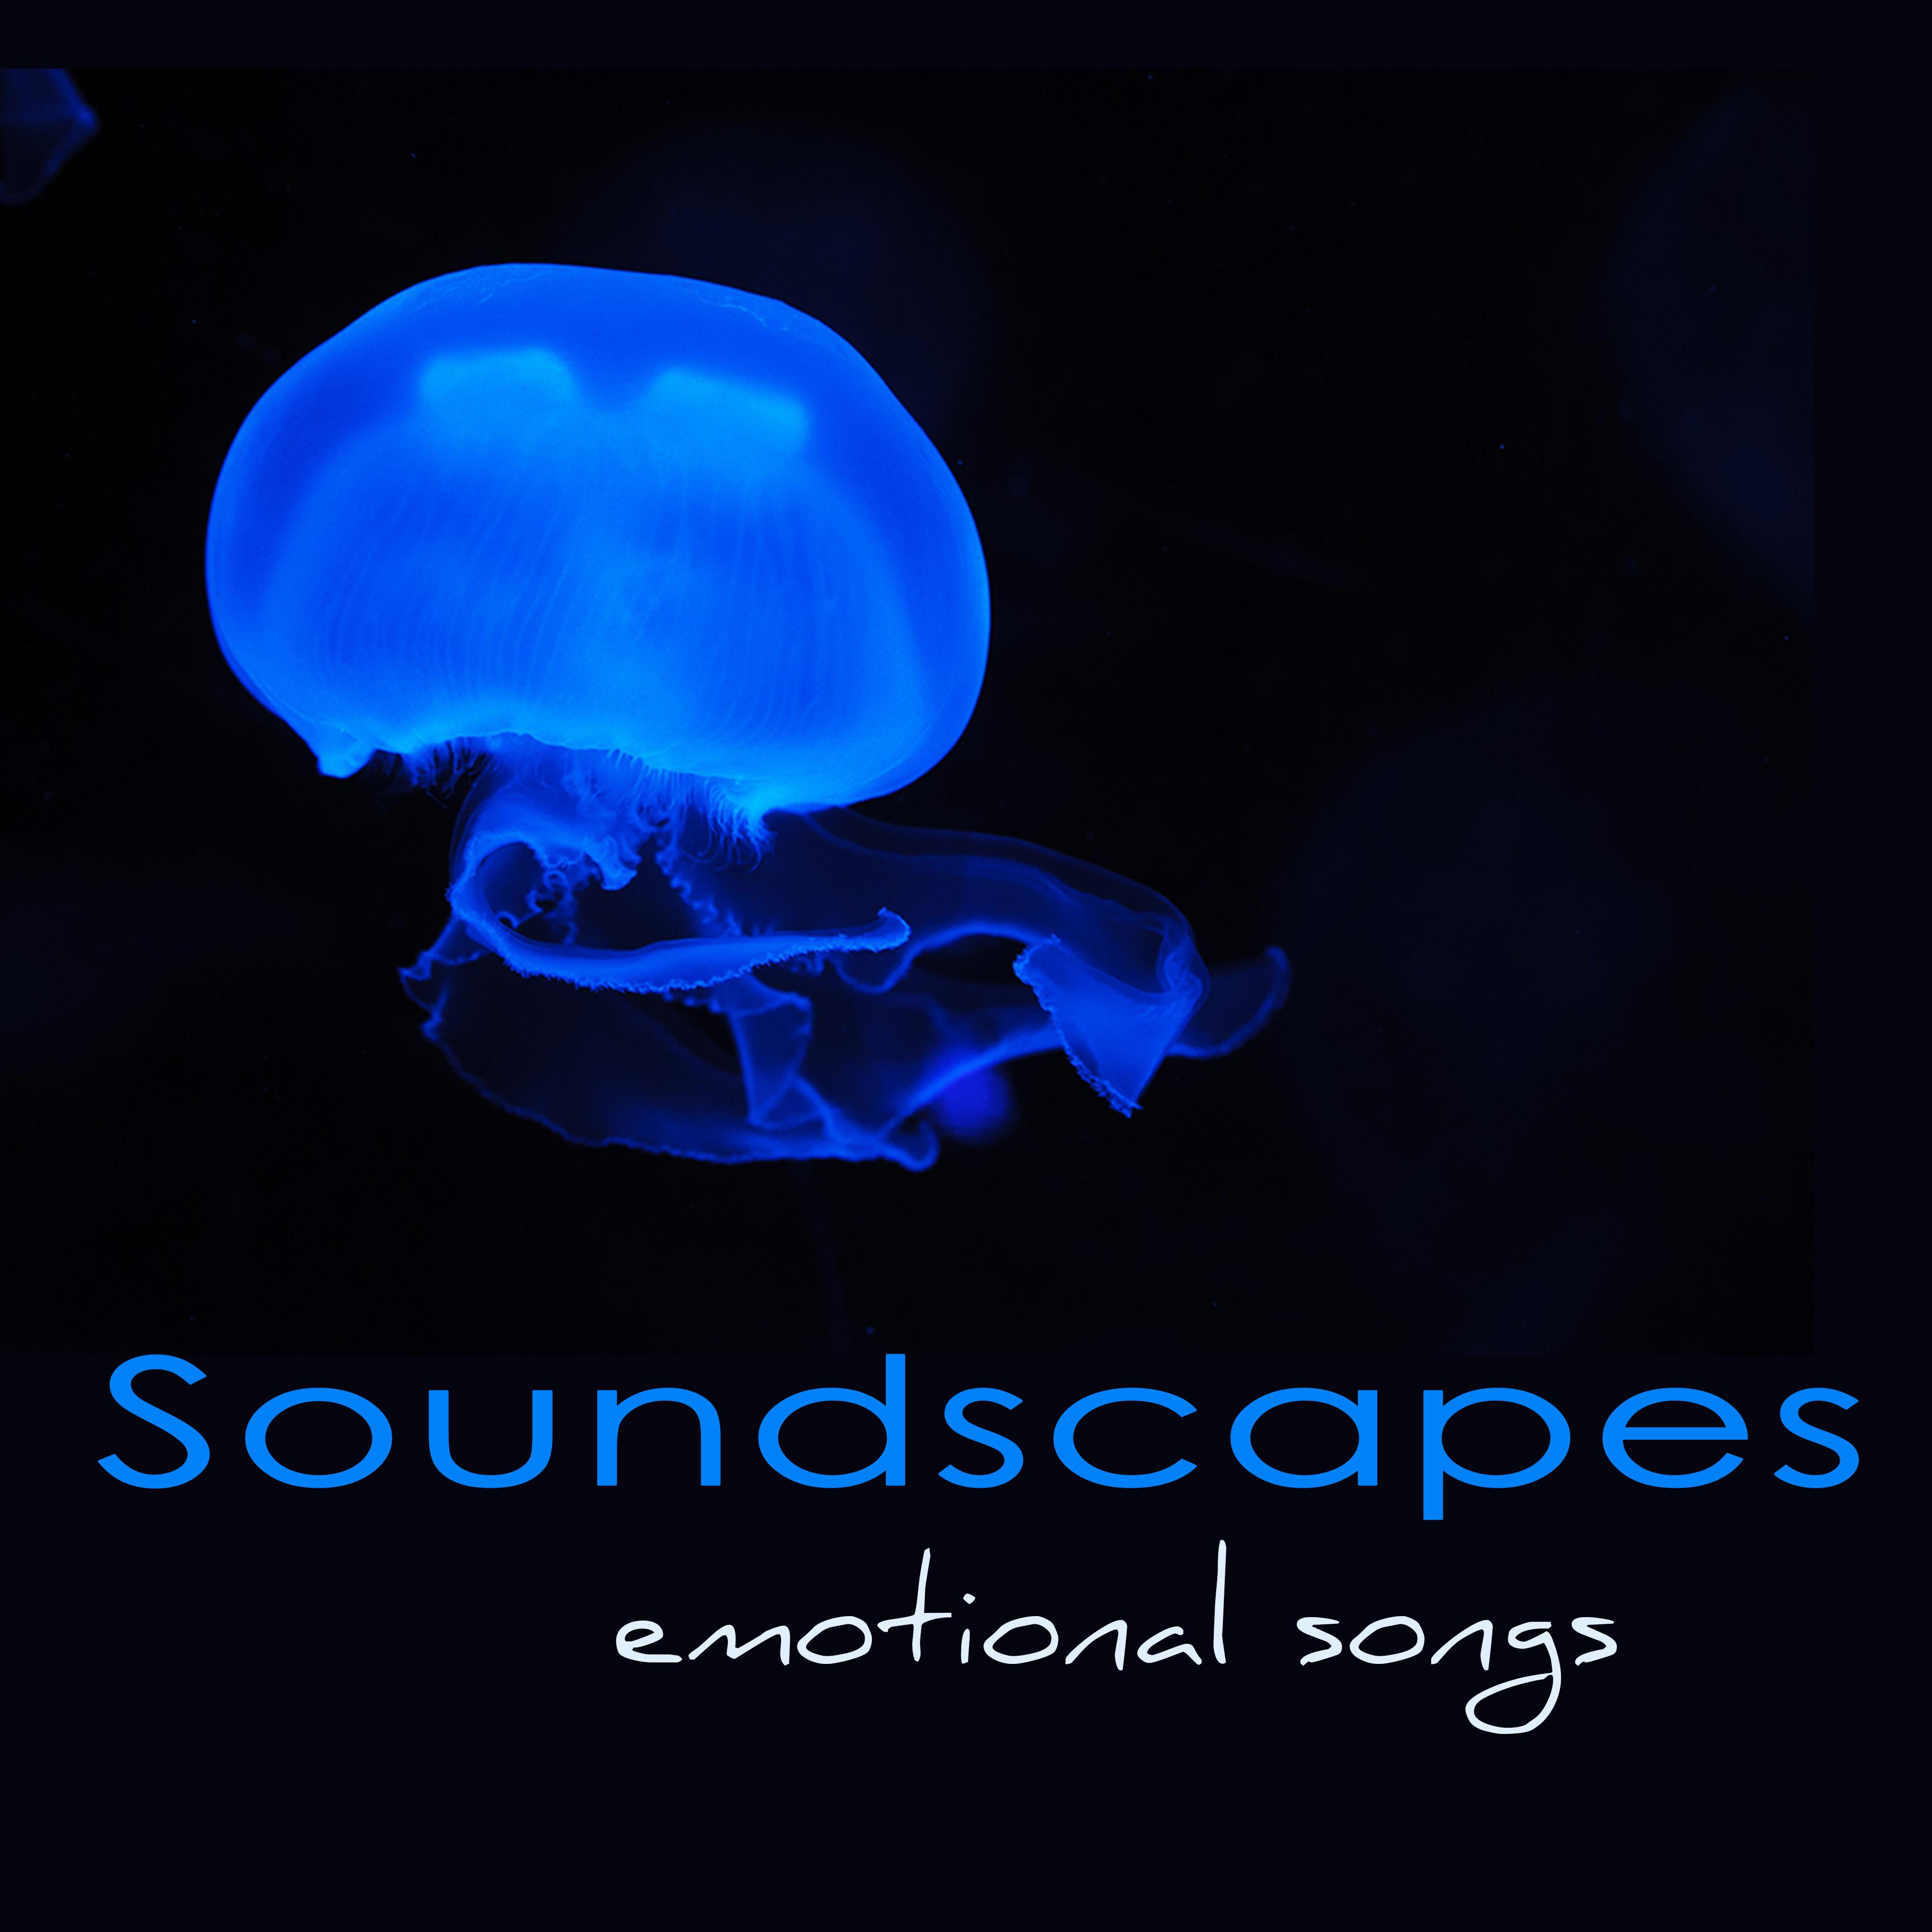 Soundscapes Emotional Songs  Atmosphere. Angels, Ambient New Age Music